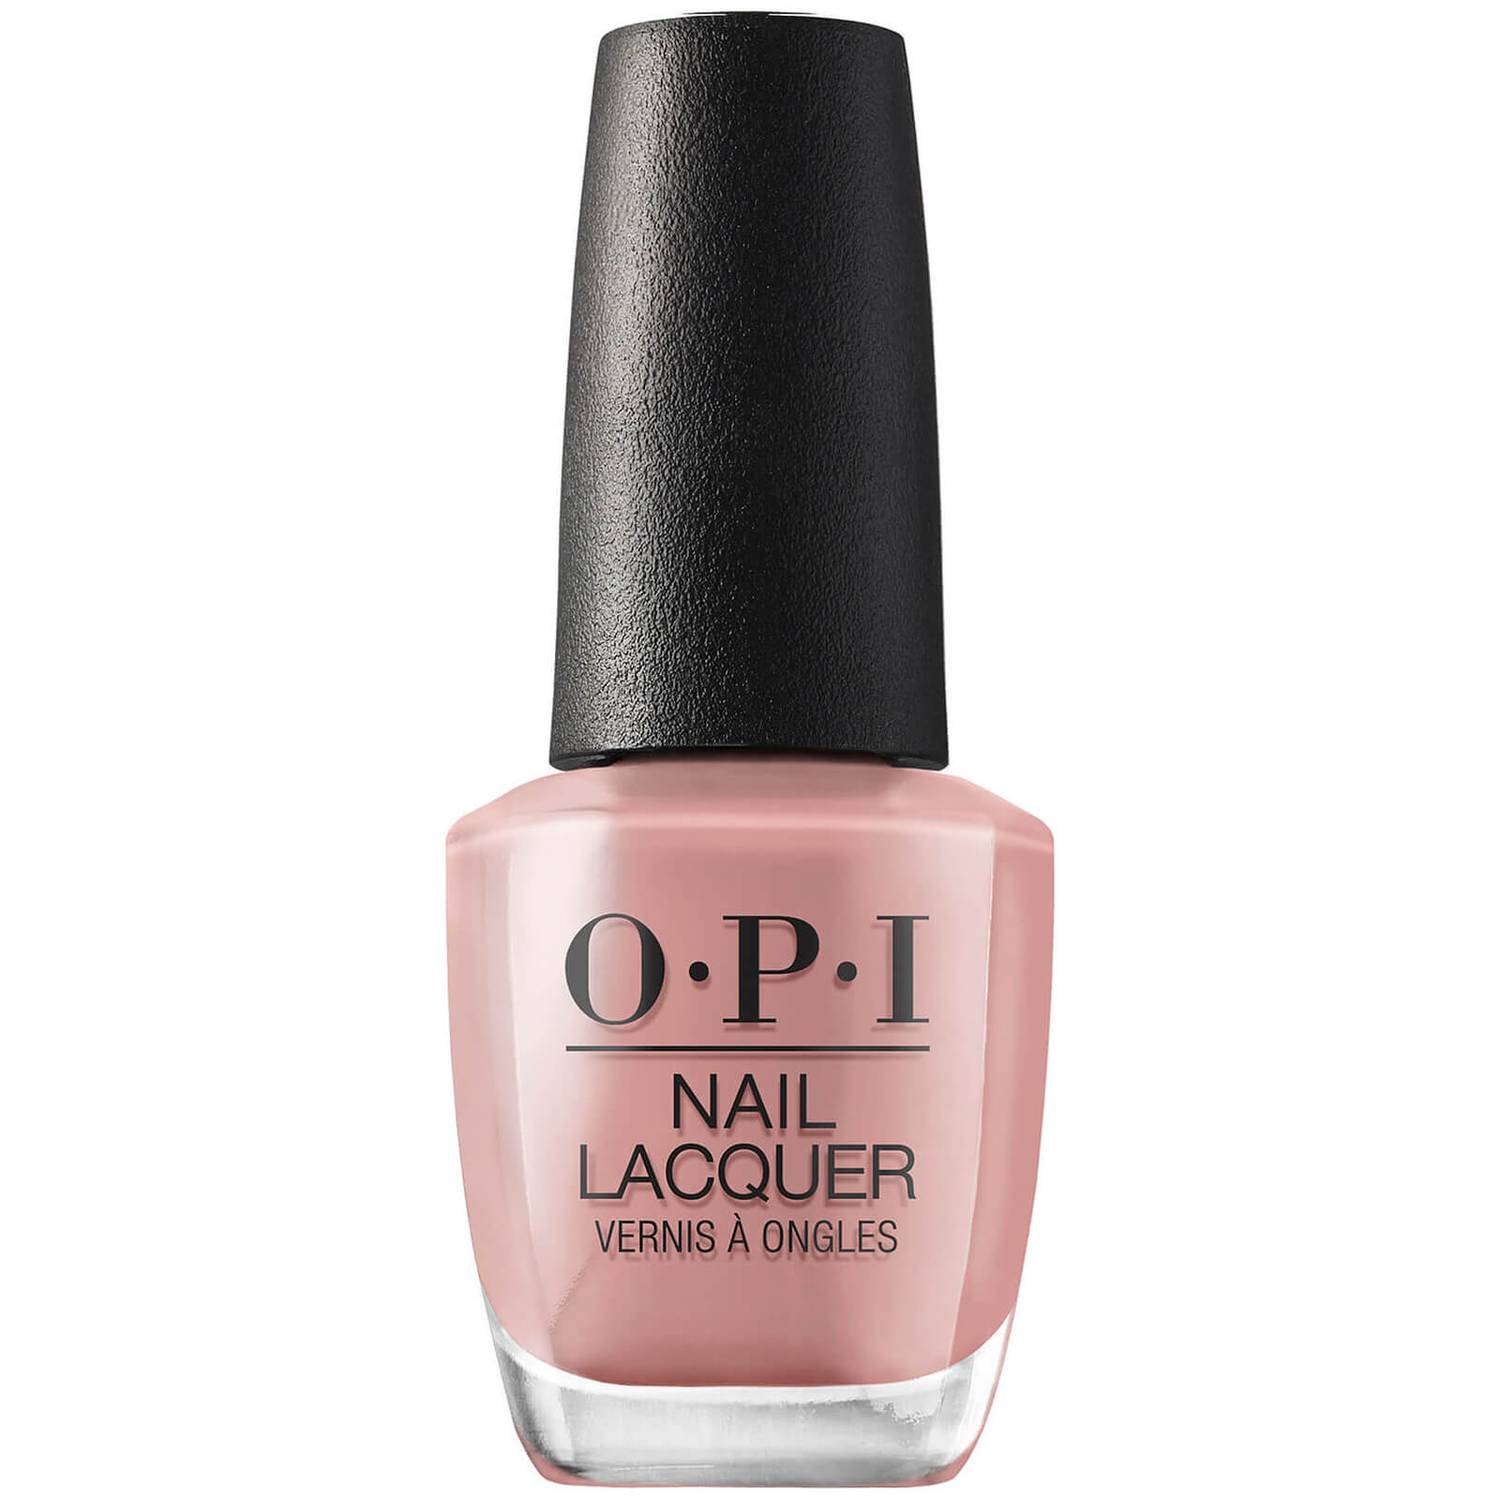 OPI’s Nature Strong range launches eight new shades